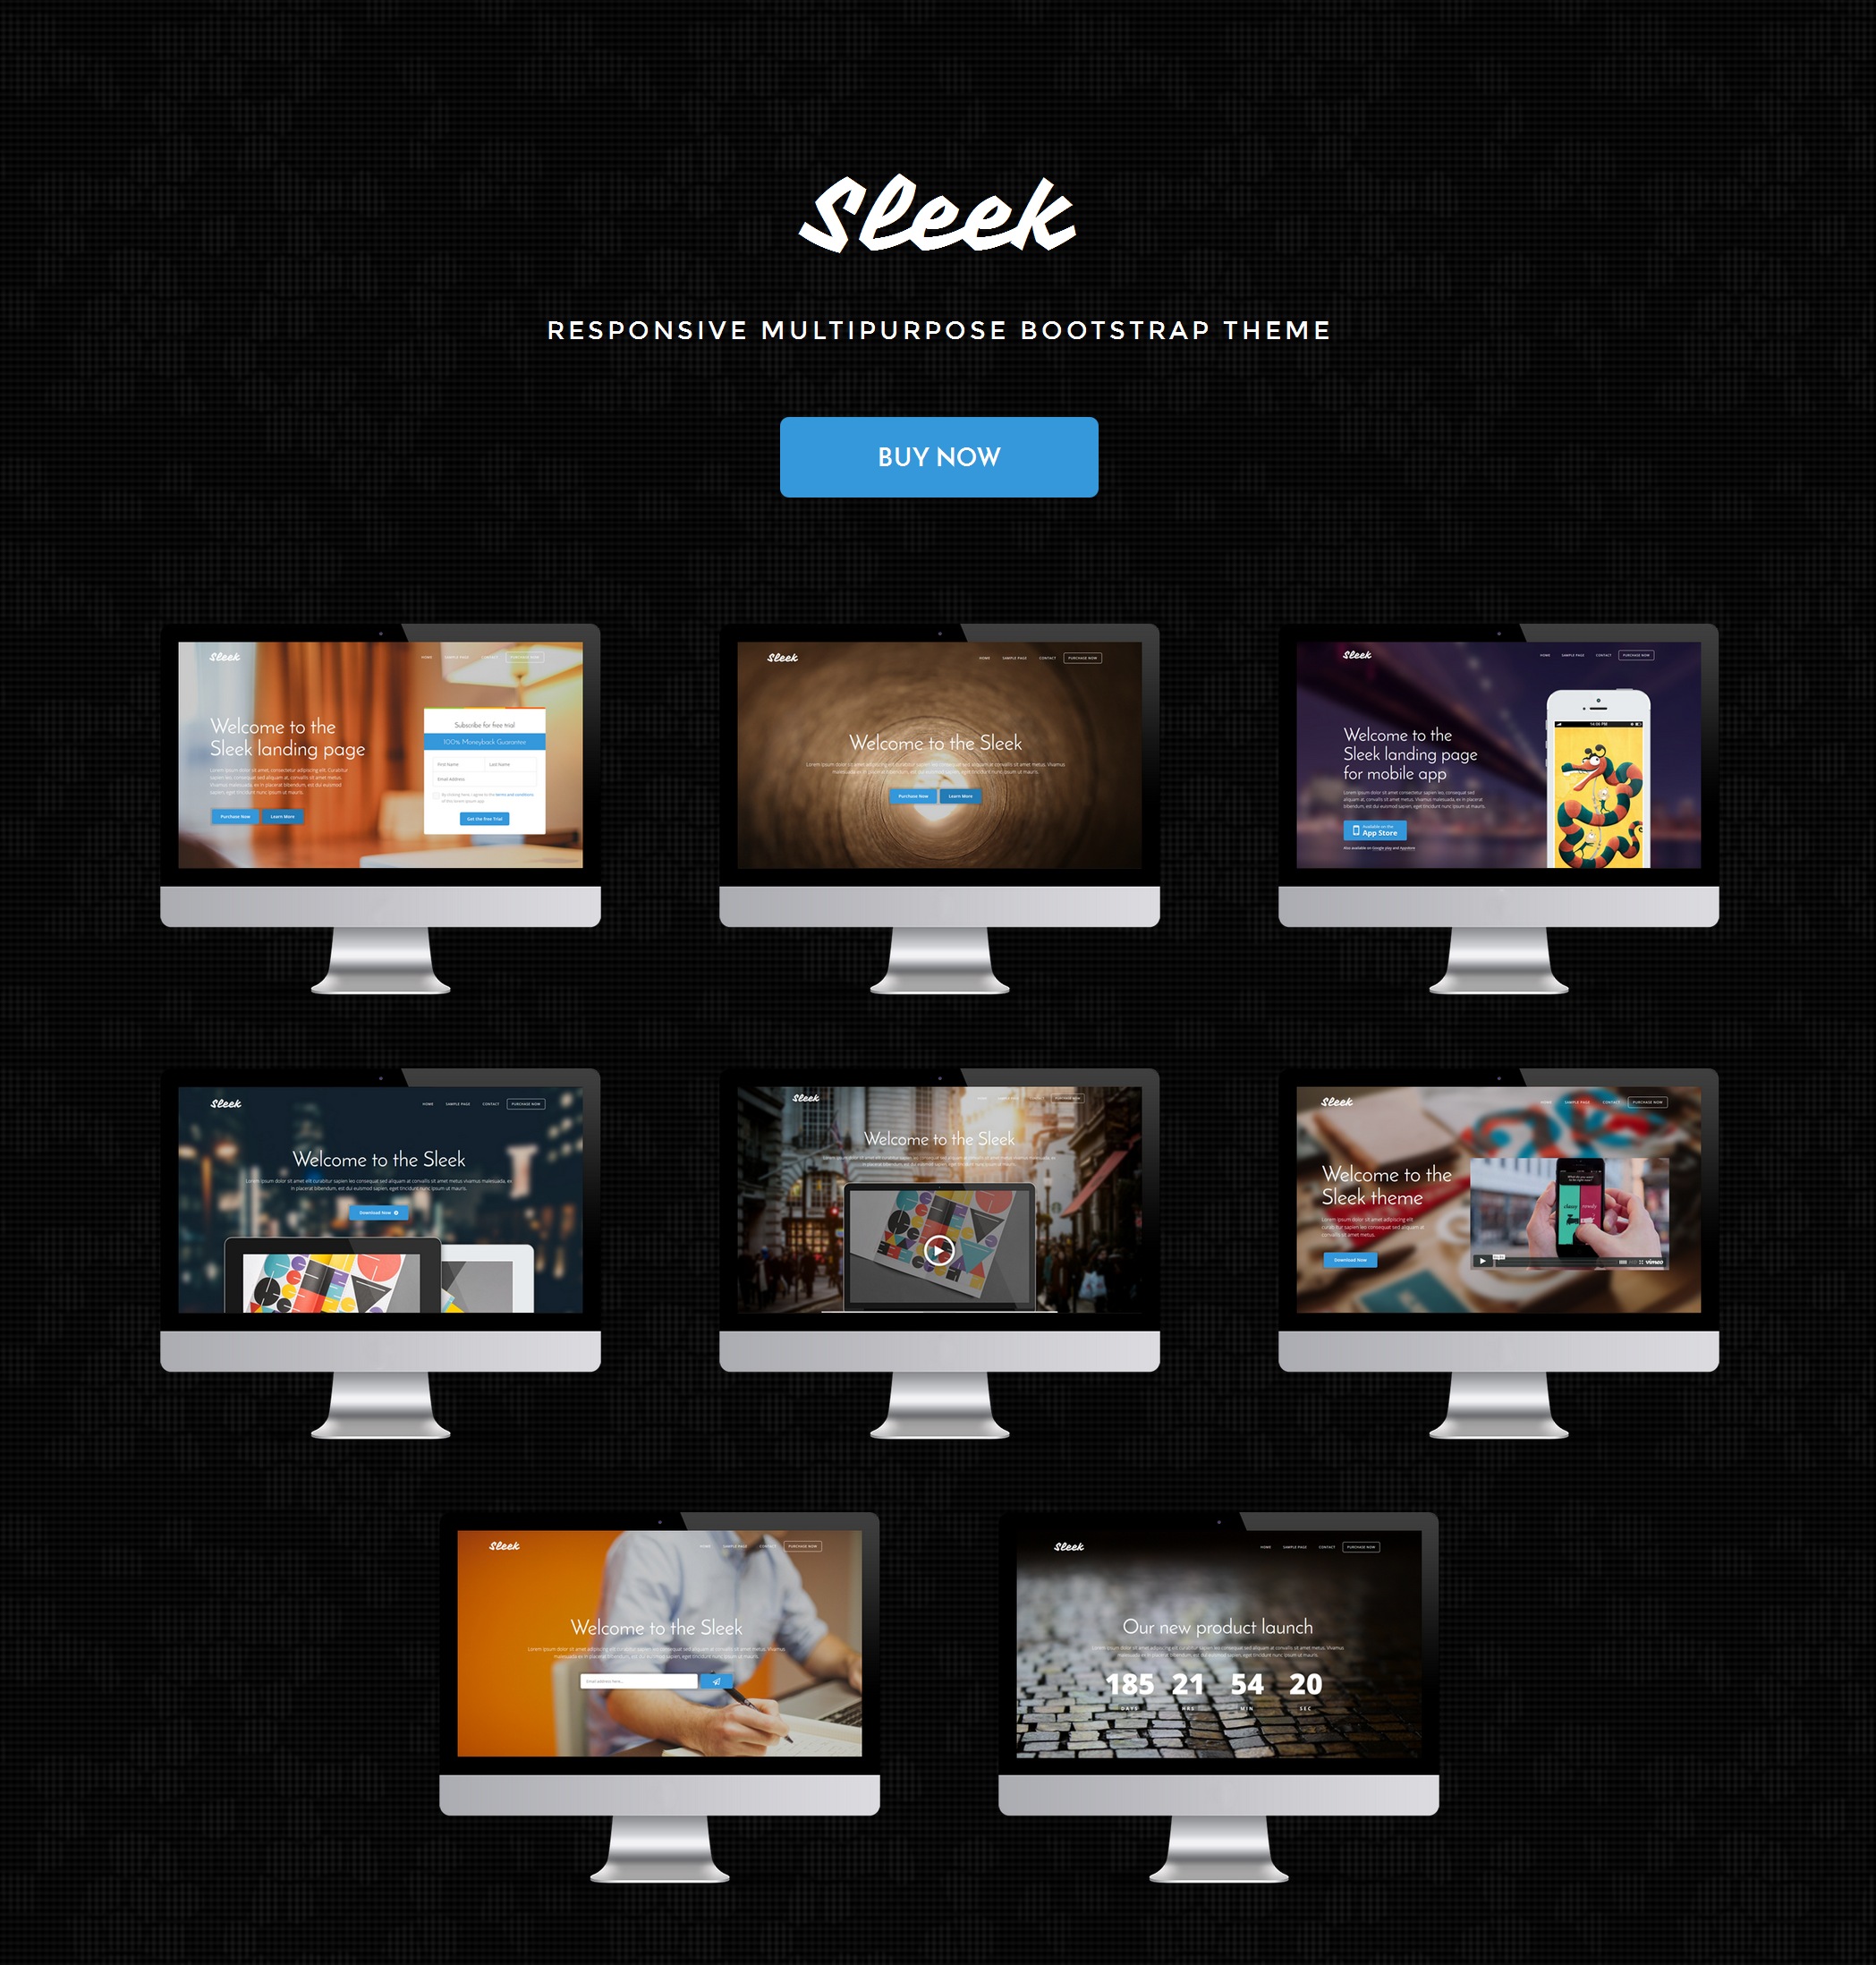 Responsive Bootstrap Image Gallery Theme